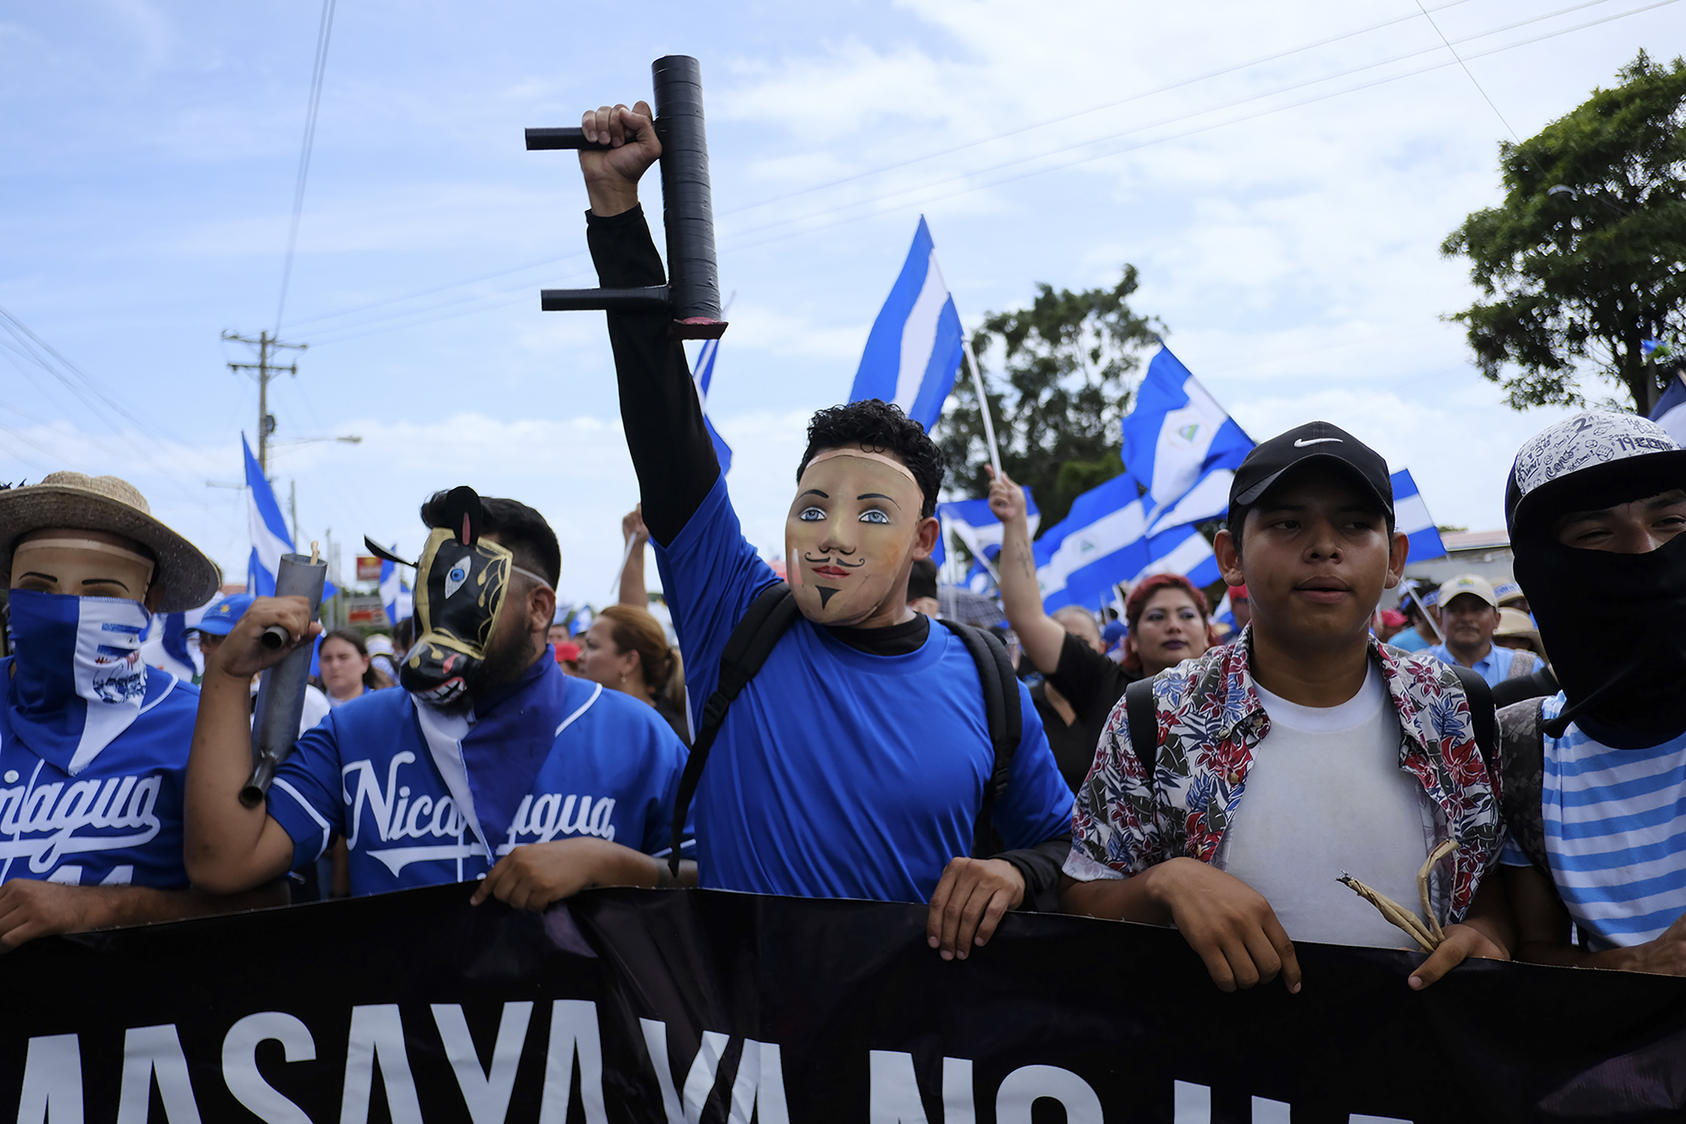 Protesters wearing folkloric masks and carrying crude, homemade mortars march through Managua, Nicaragua, July 12, 2018. (Brent McDonald/The New York Times)